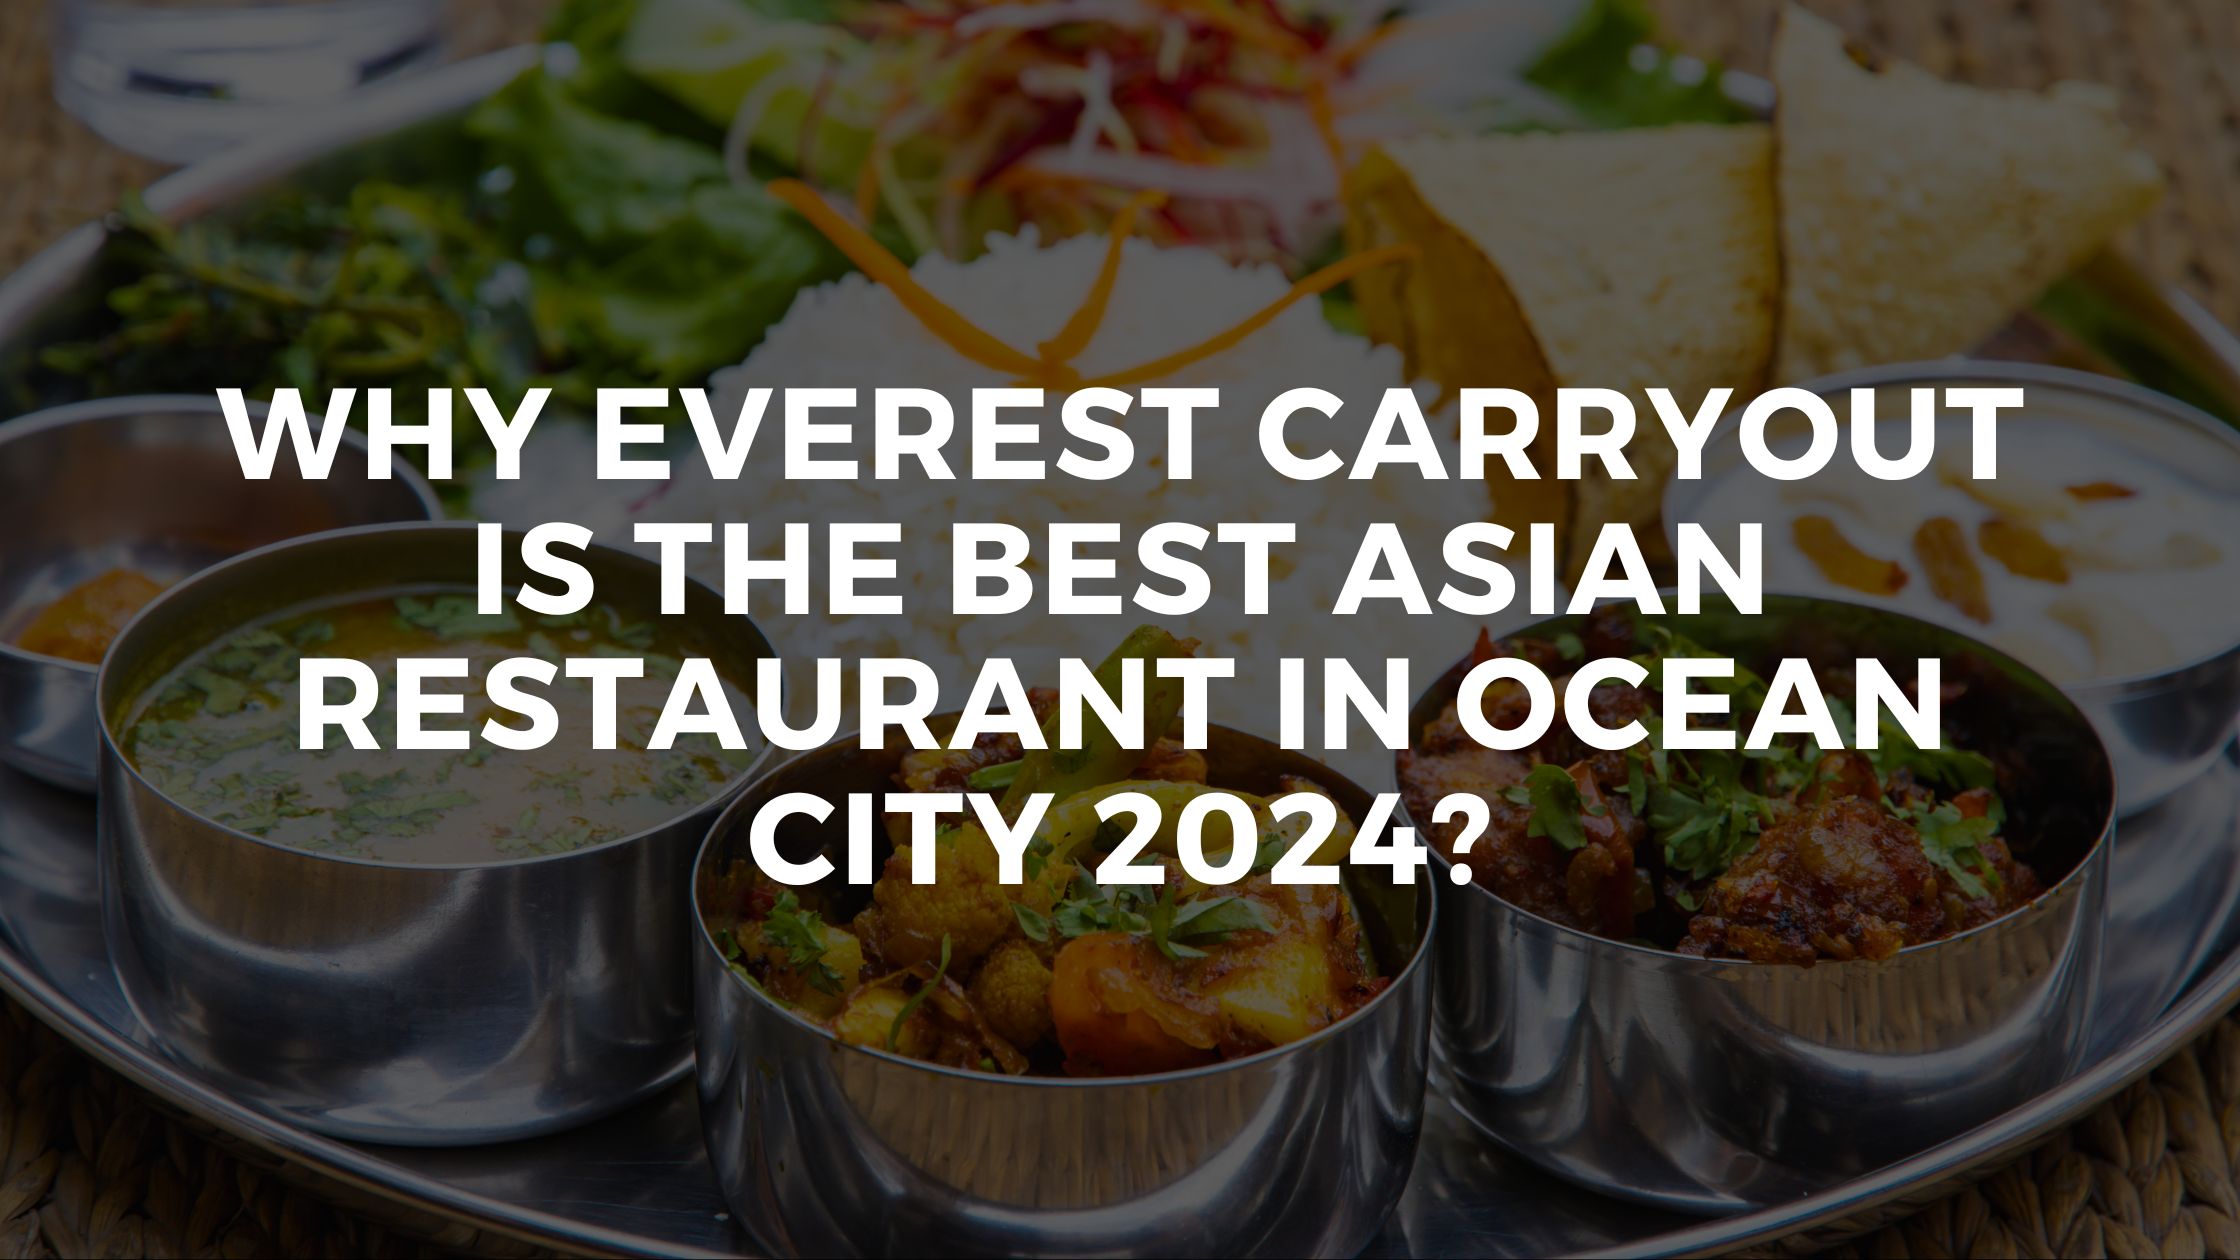 Why Everest Carryout is the best Asian Restaurant in Ocean City 2024?